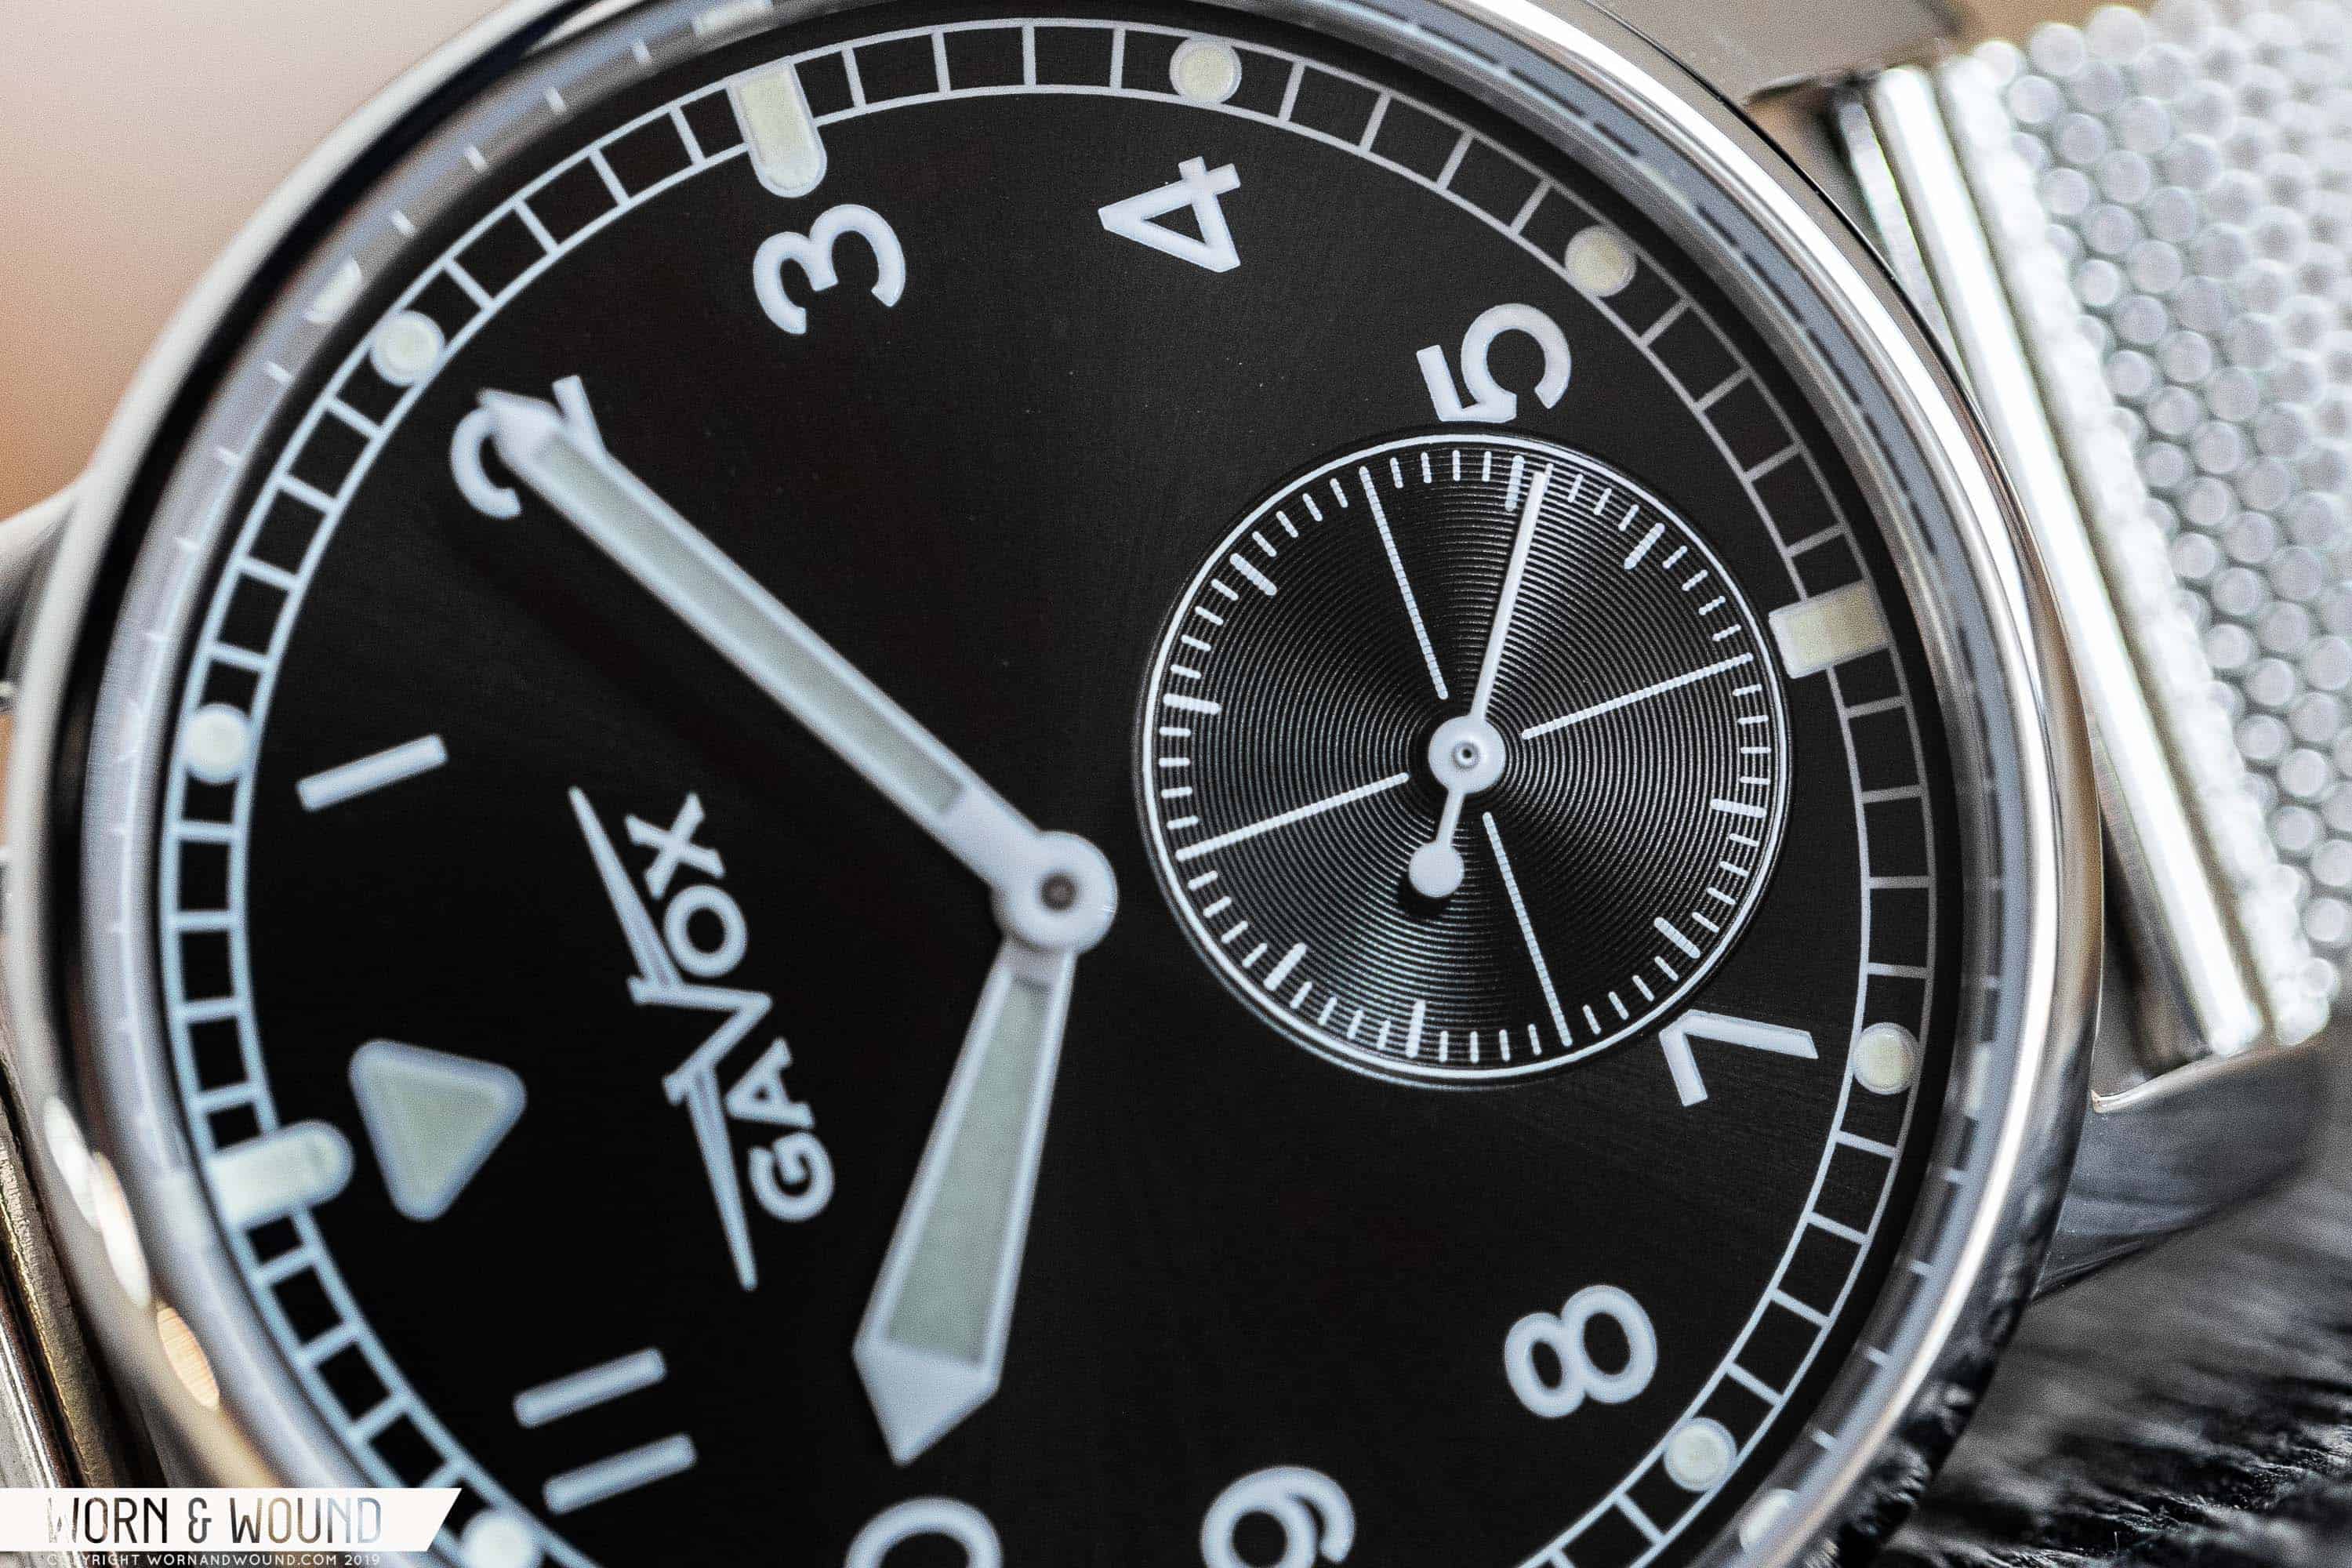 First Look at the Gavox Spitfire, a Traditionally Sized Pilot’s Watch